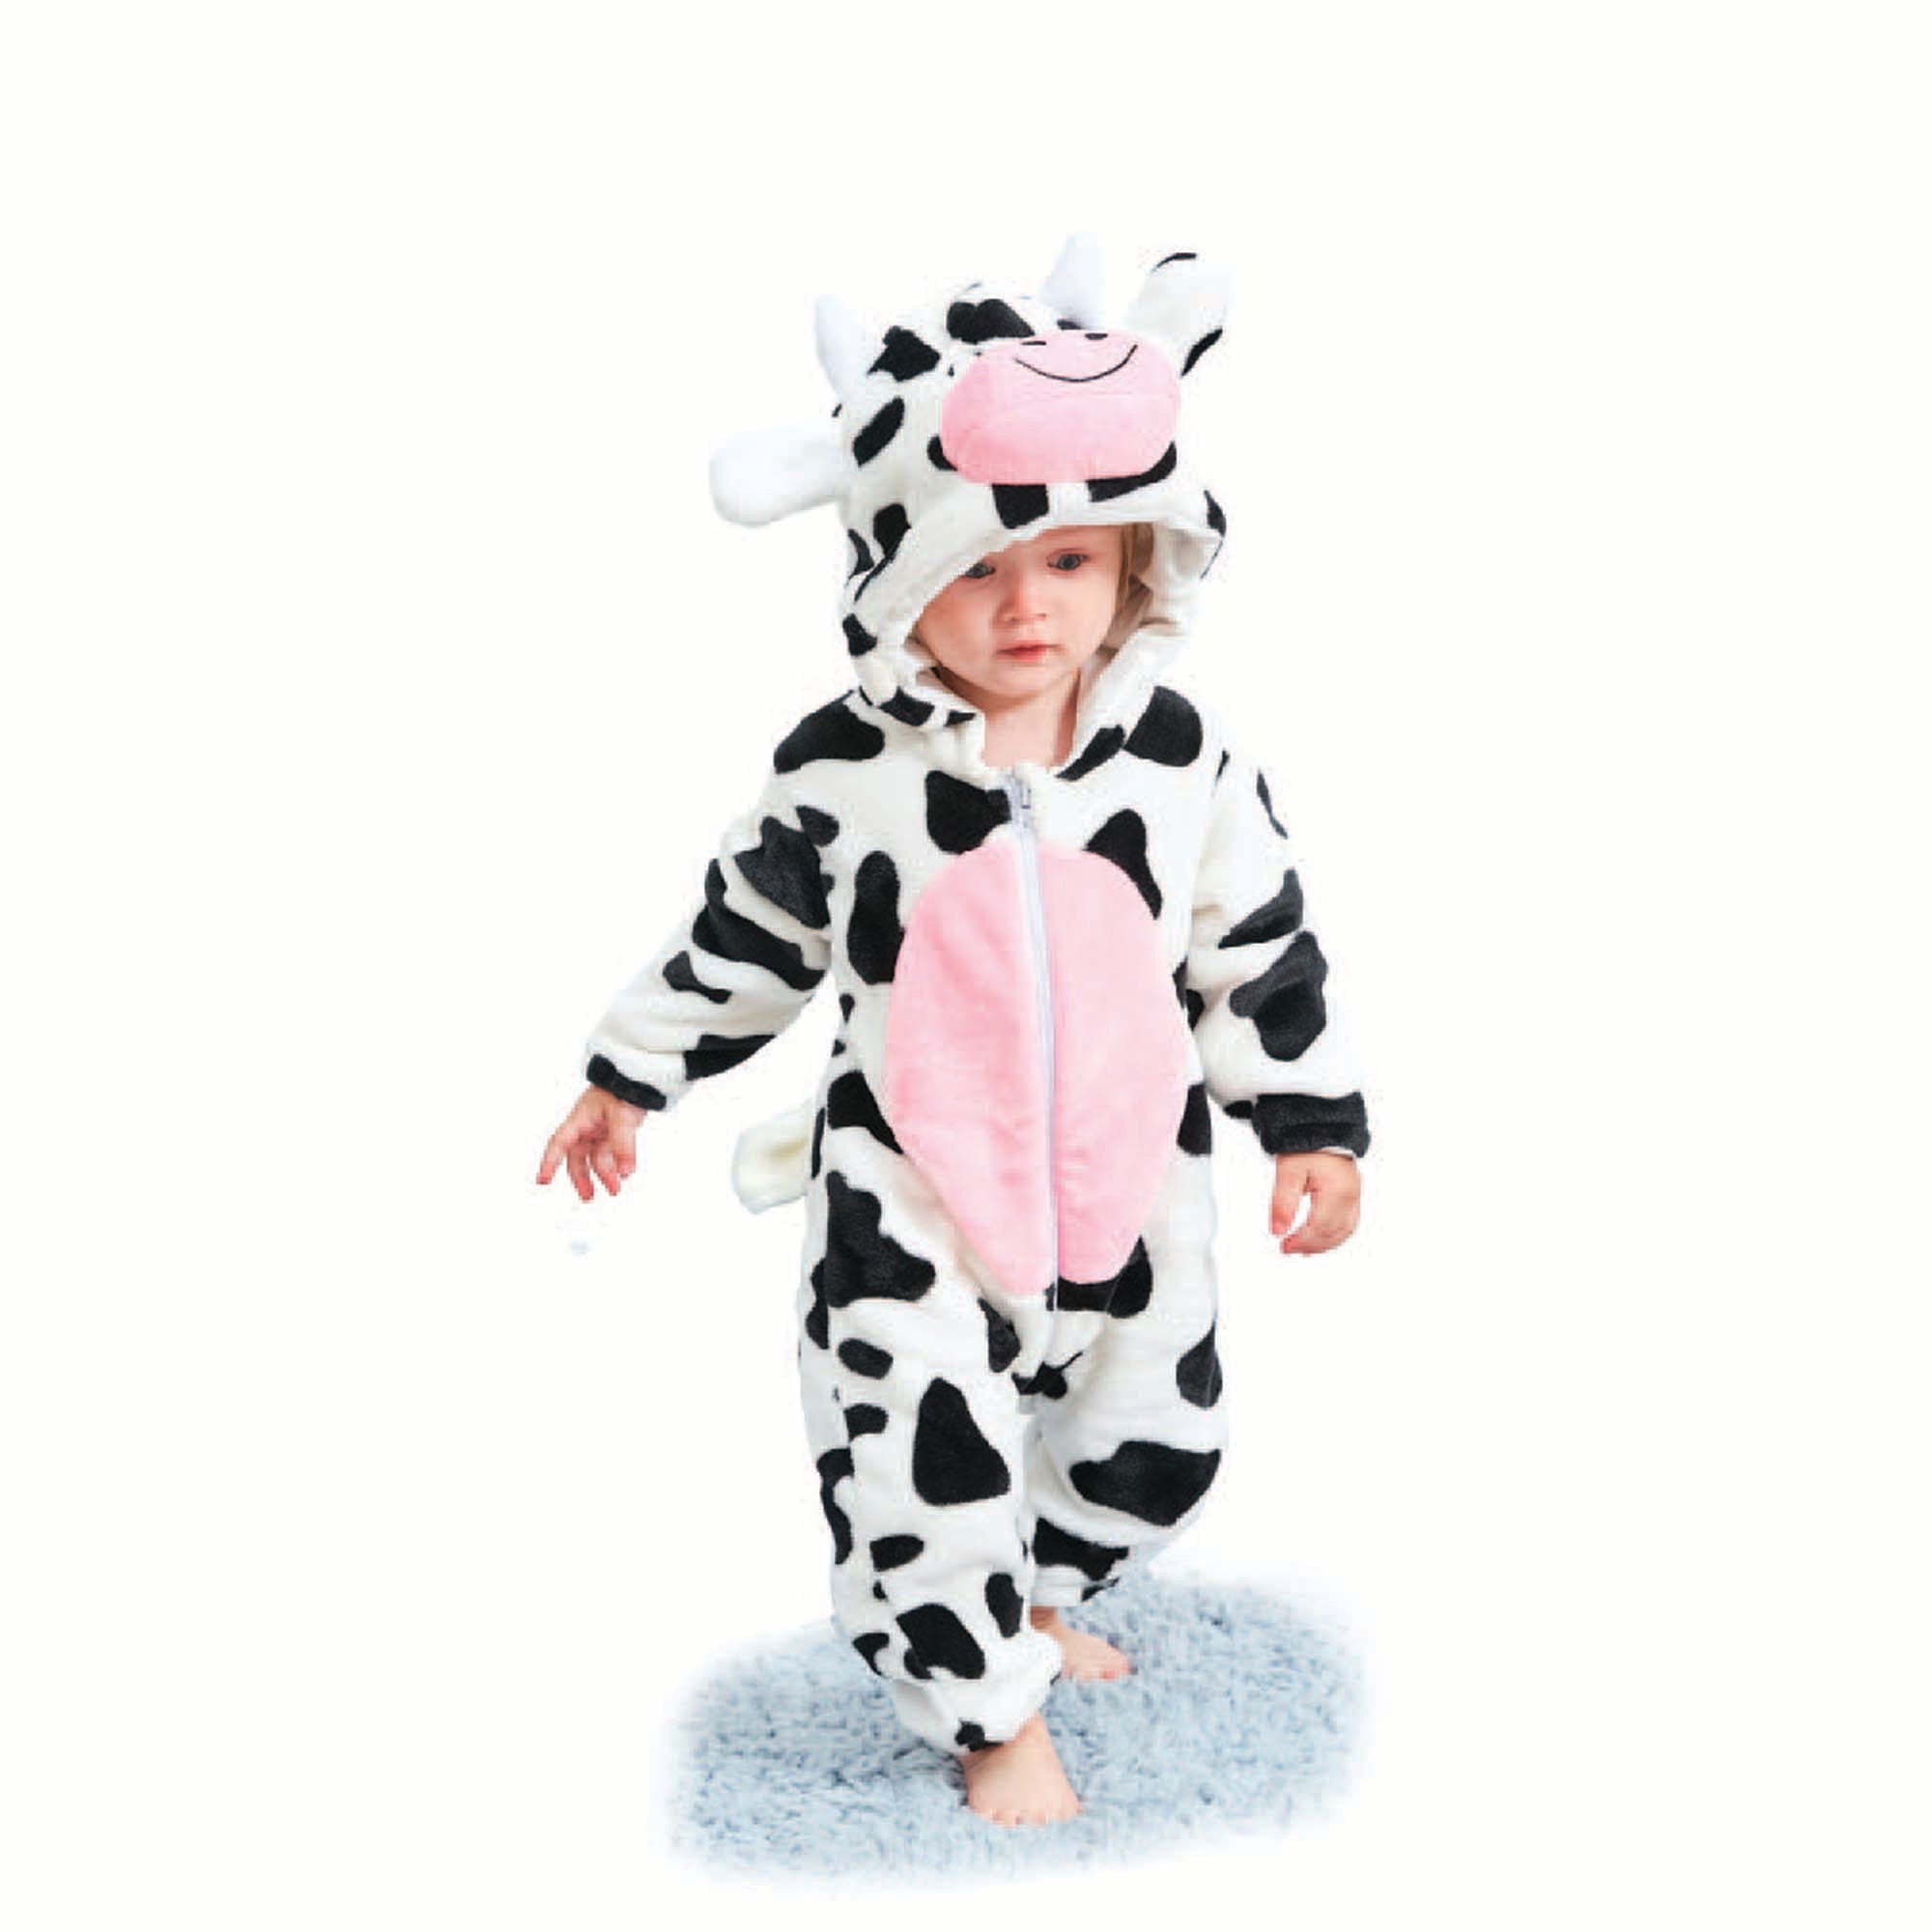 Little Cow Costume for Babies and Toddlers, Jumpsuit with Attached Hood